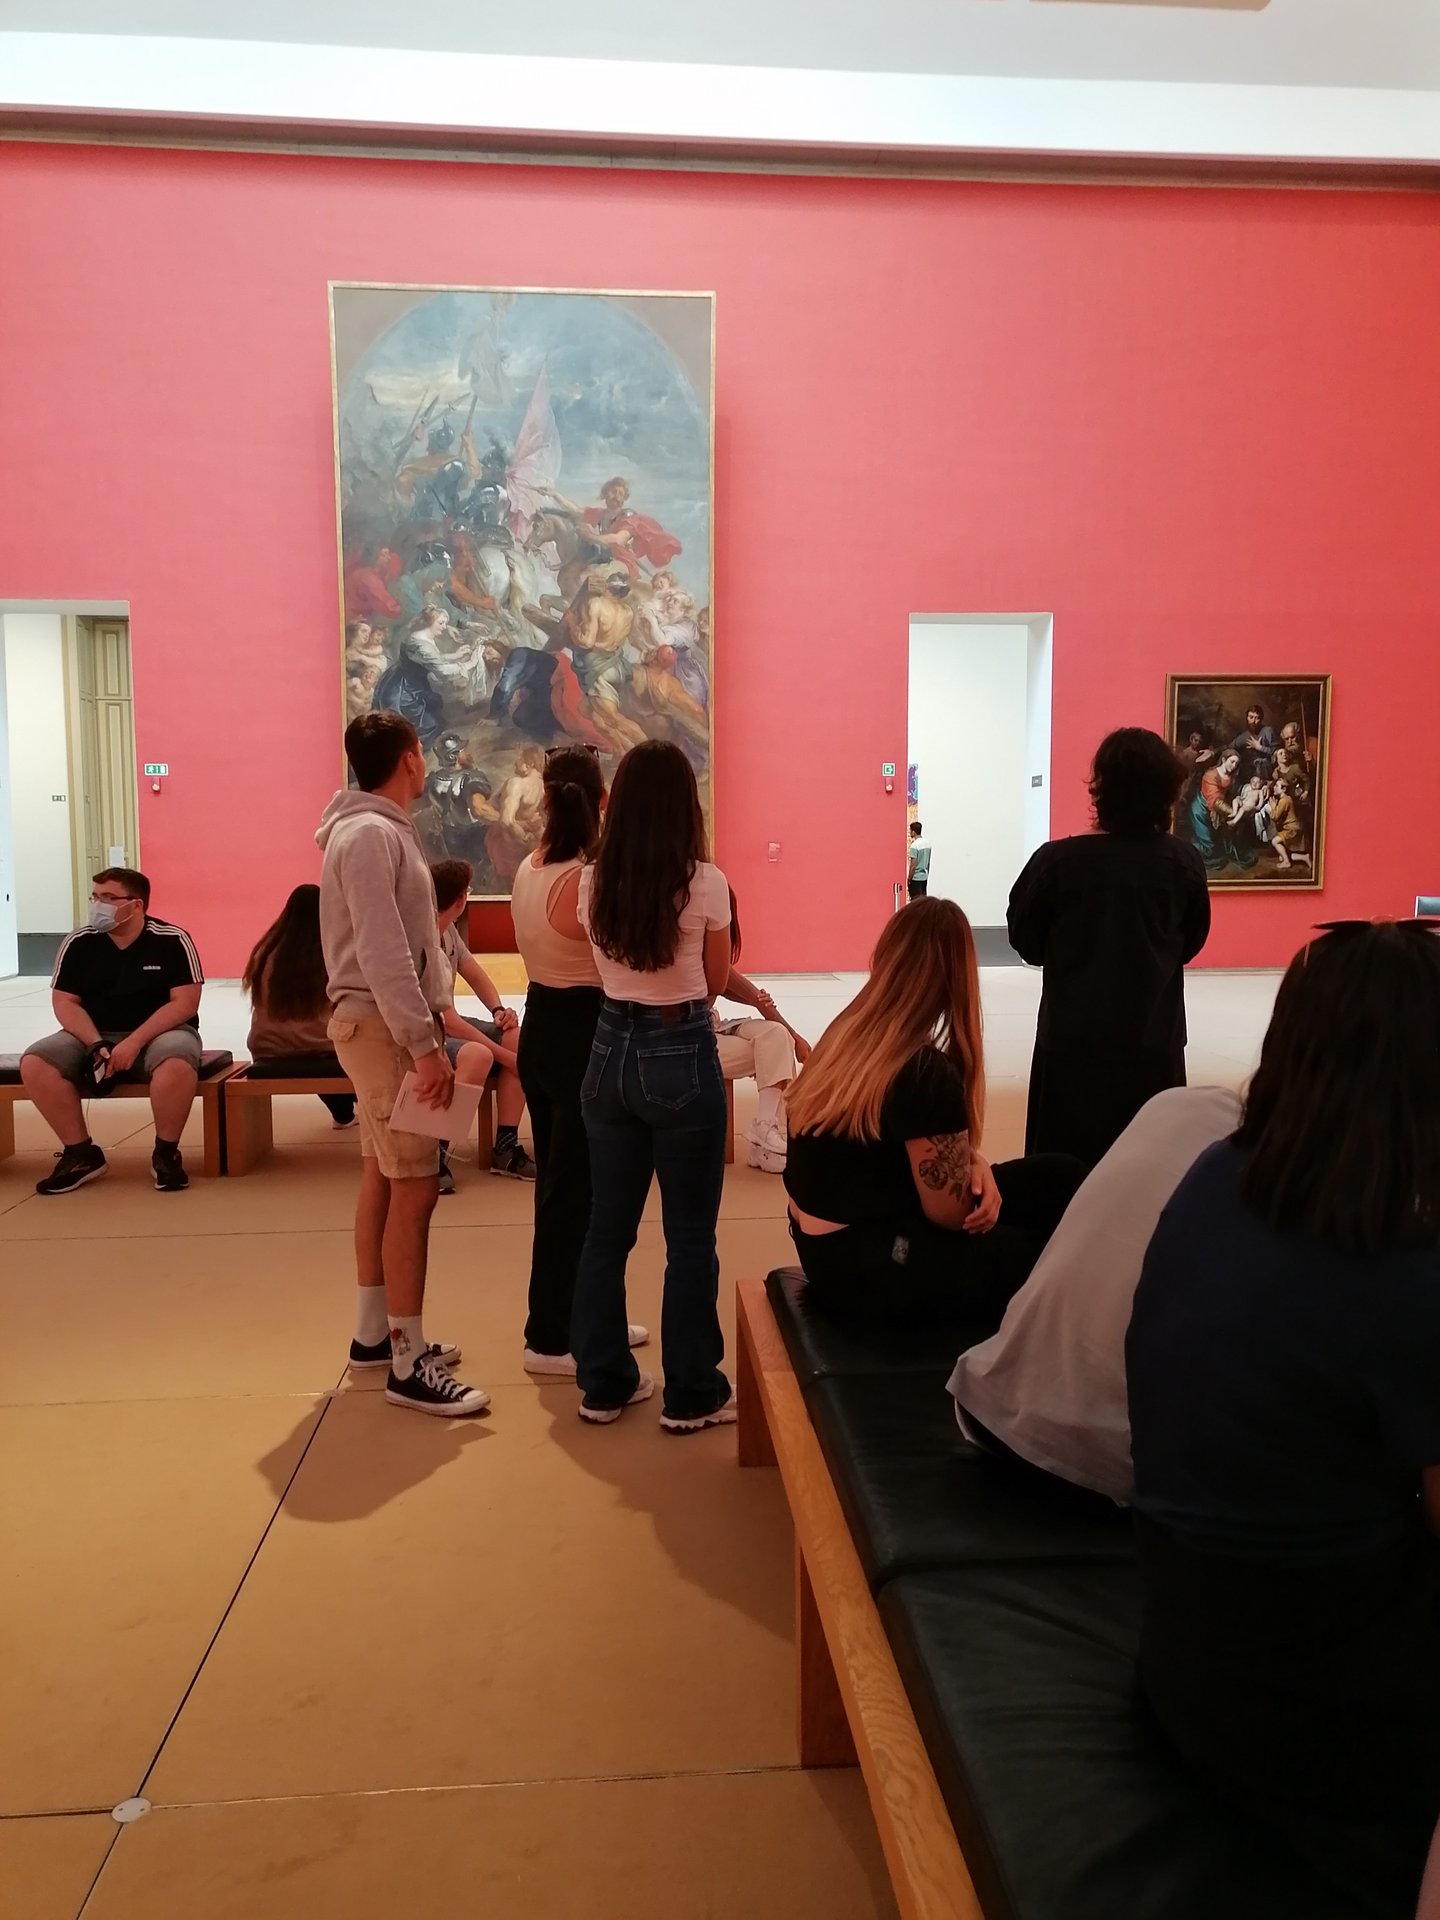 Students watching pictures in the museum